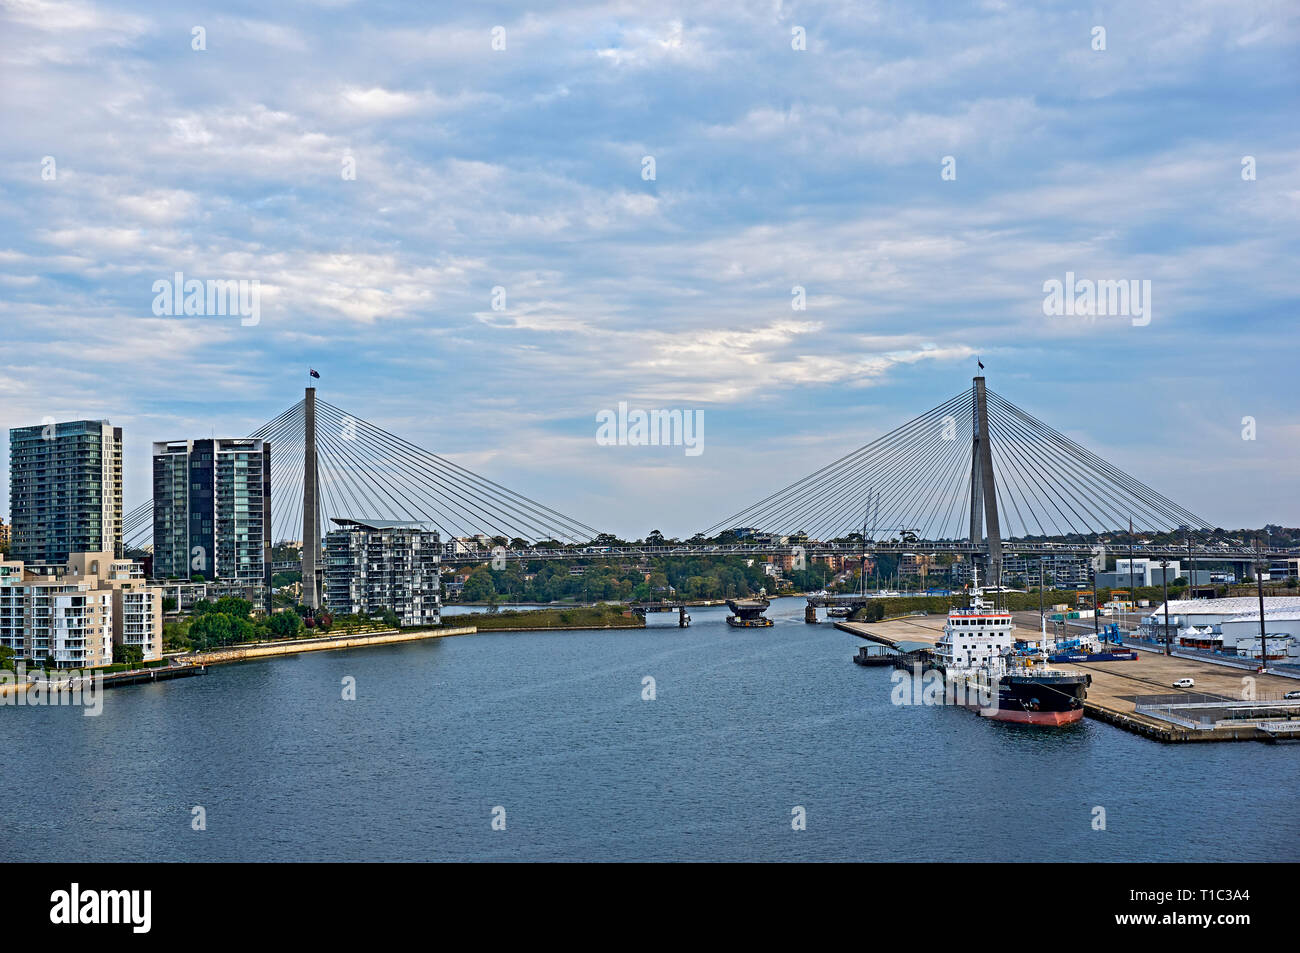 The Anzac Bridge is an 8-lane cable-stayed bridge spanning Johnstons Bay between Pyrmont and Glebe Island (part of the suburb of Rozelle), close to th Stock Photo